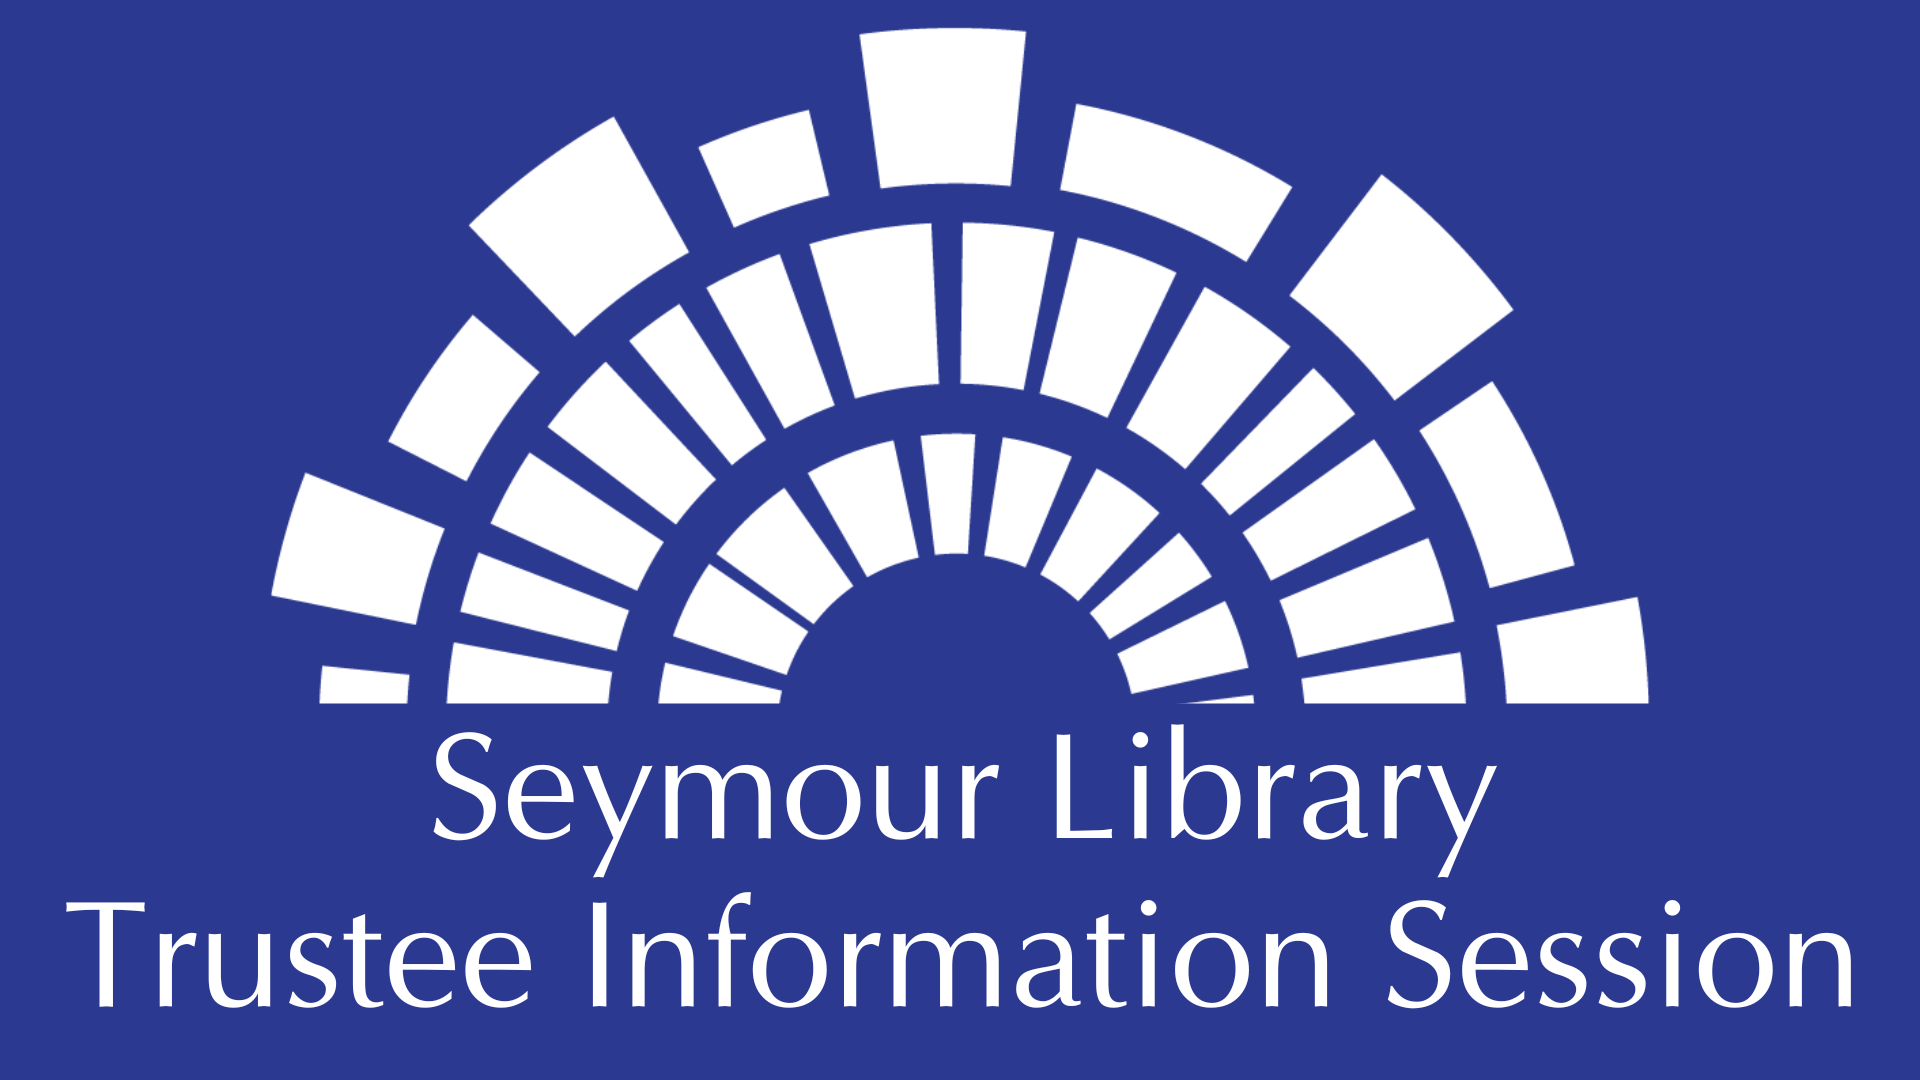 Seymour Library Trustee Information Session with Seymour Library Graphic as a semi-circle.